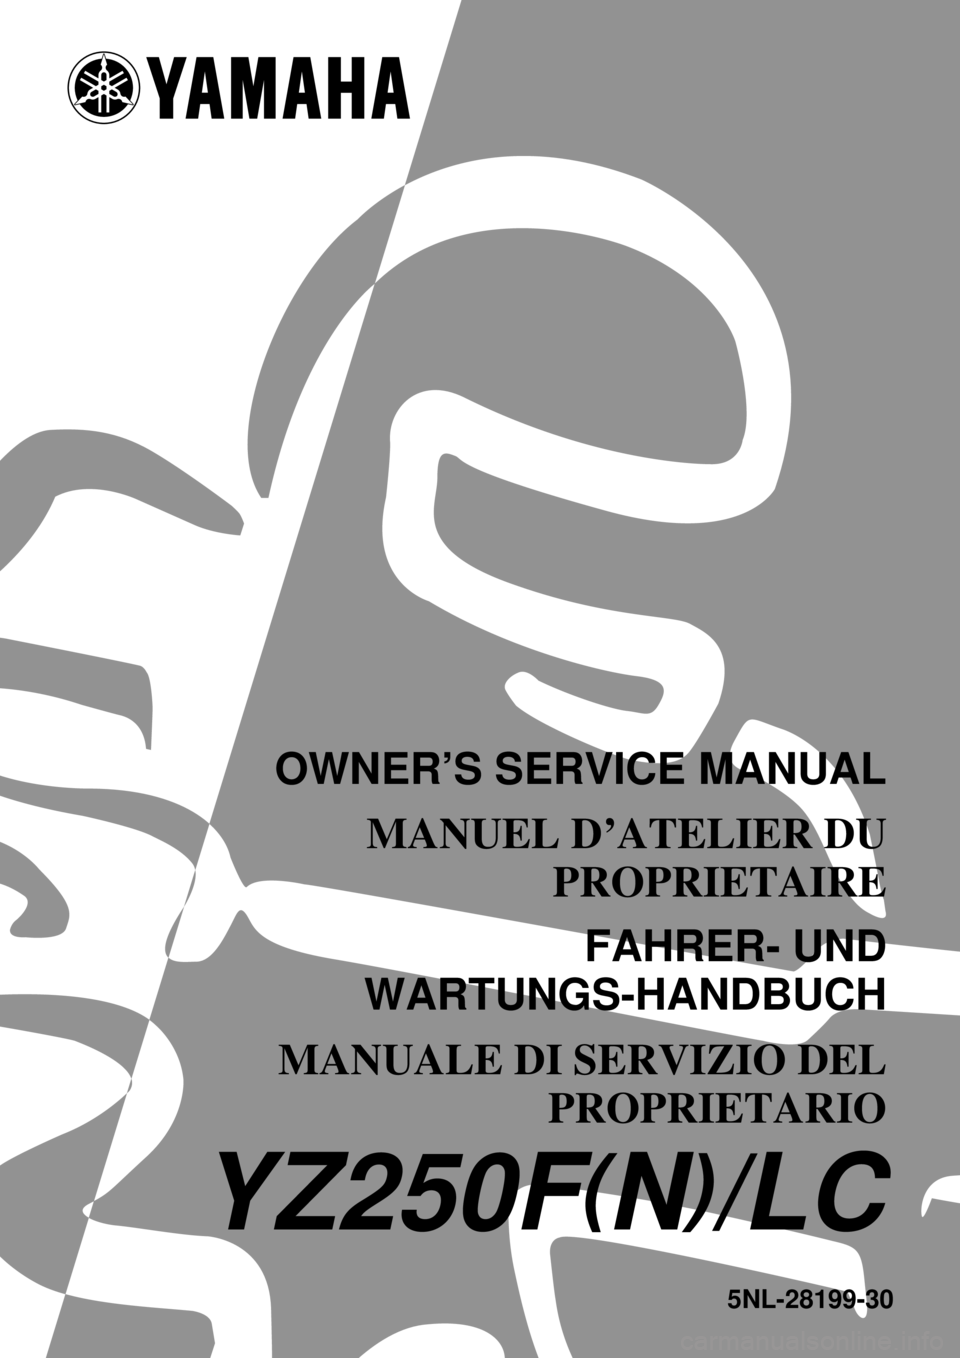 YAMAHA YZ250F 2001  Owners Manual 5NL-28199-30
YZ250F(N)/LC
OWNER’S SERVICE MANUAL
MANUEL D’ATELIER DU
PROPRIETAIRE
FAHRER- UND
WARTUNGS-HANDBUCH
MANUALE DI SERVIZIO DEL
PROPRIETARIO 